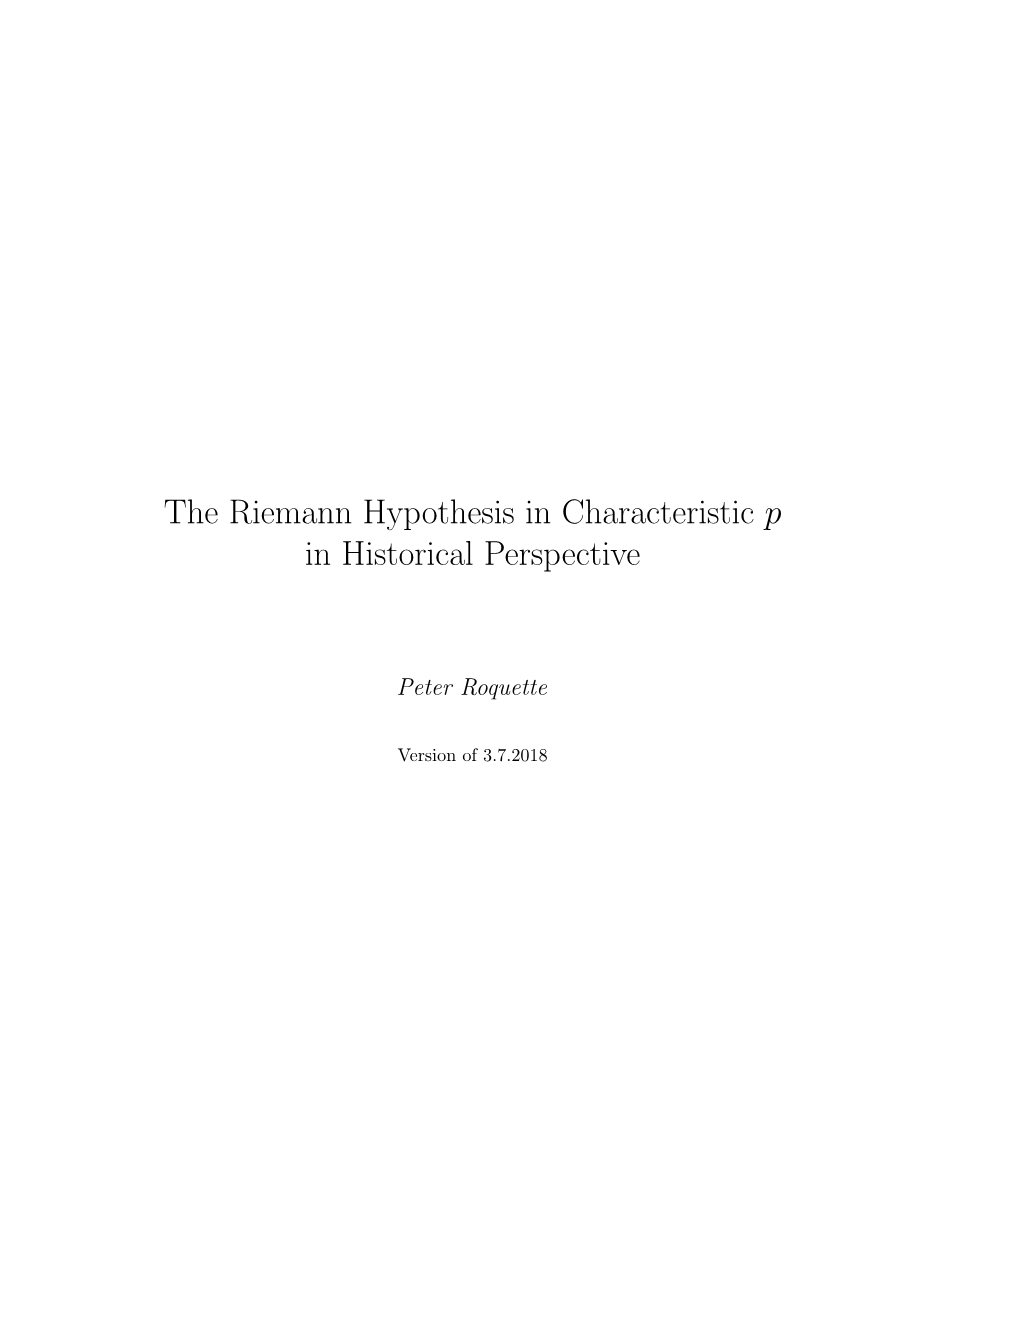 The Riemann Hypothesis in Characteristic P in Historical Perspective